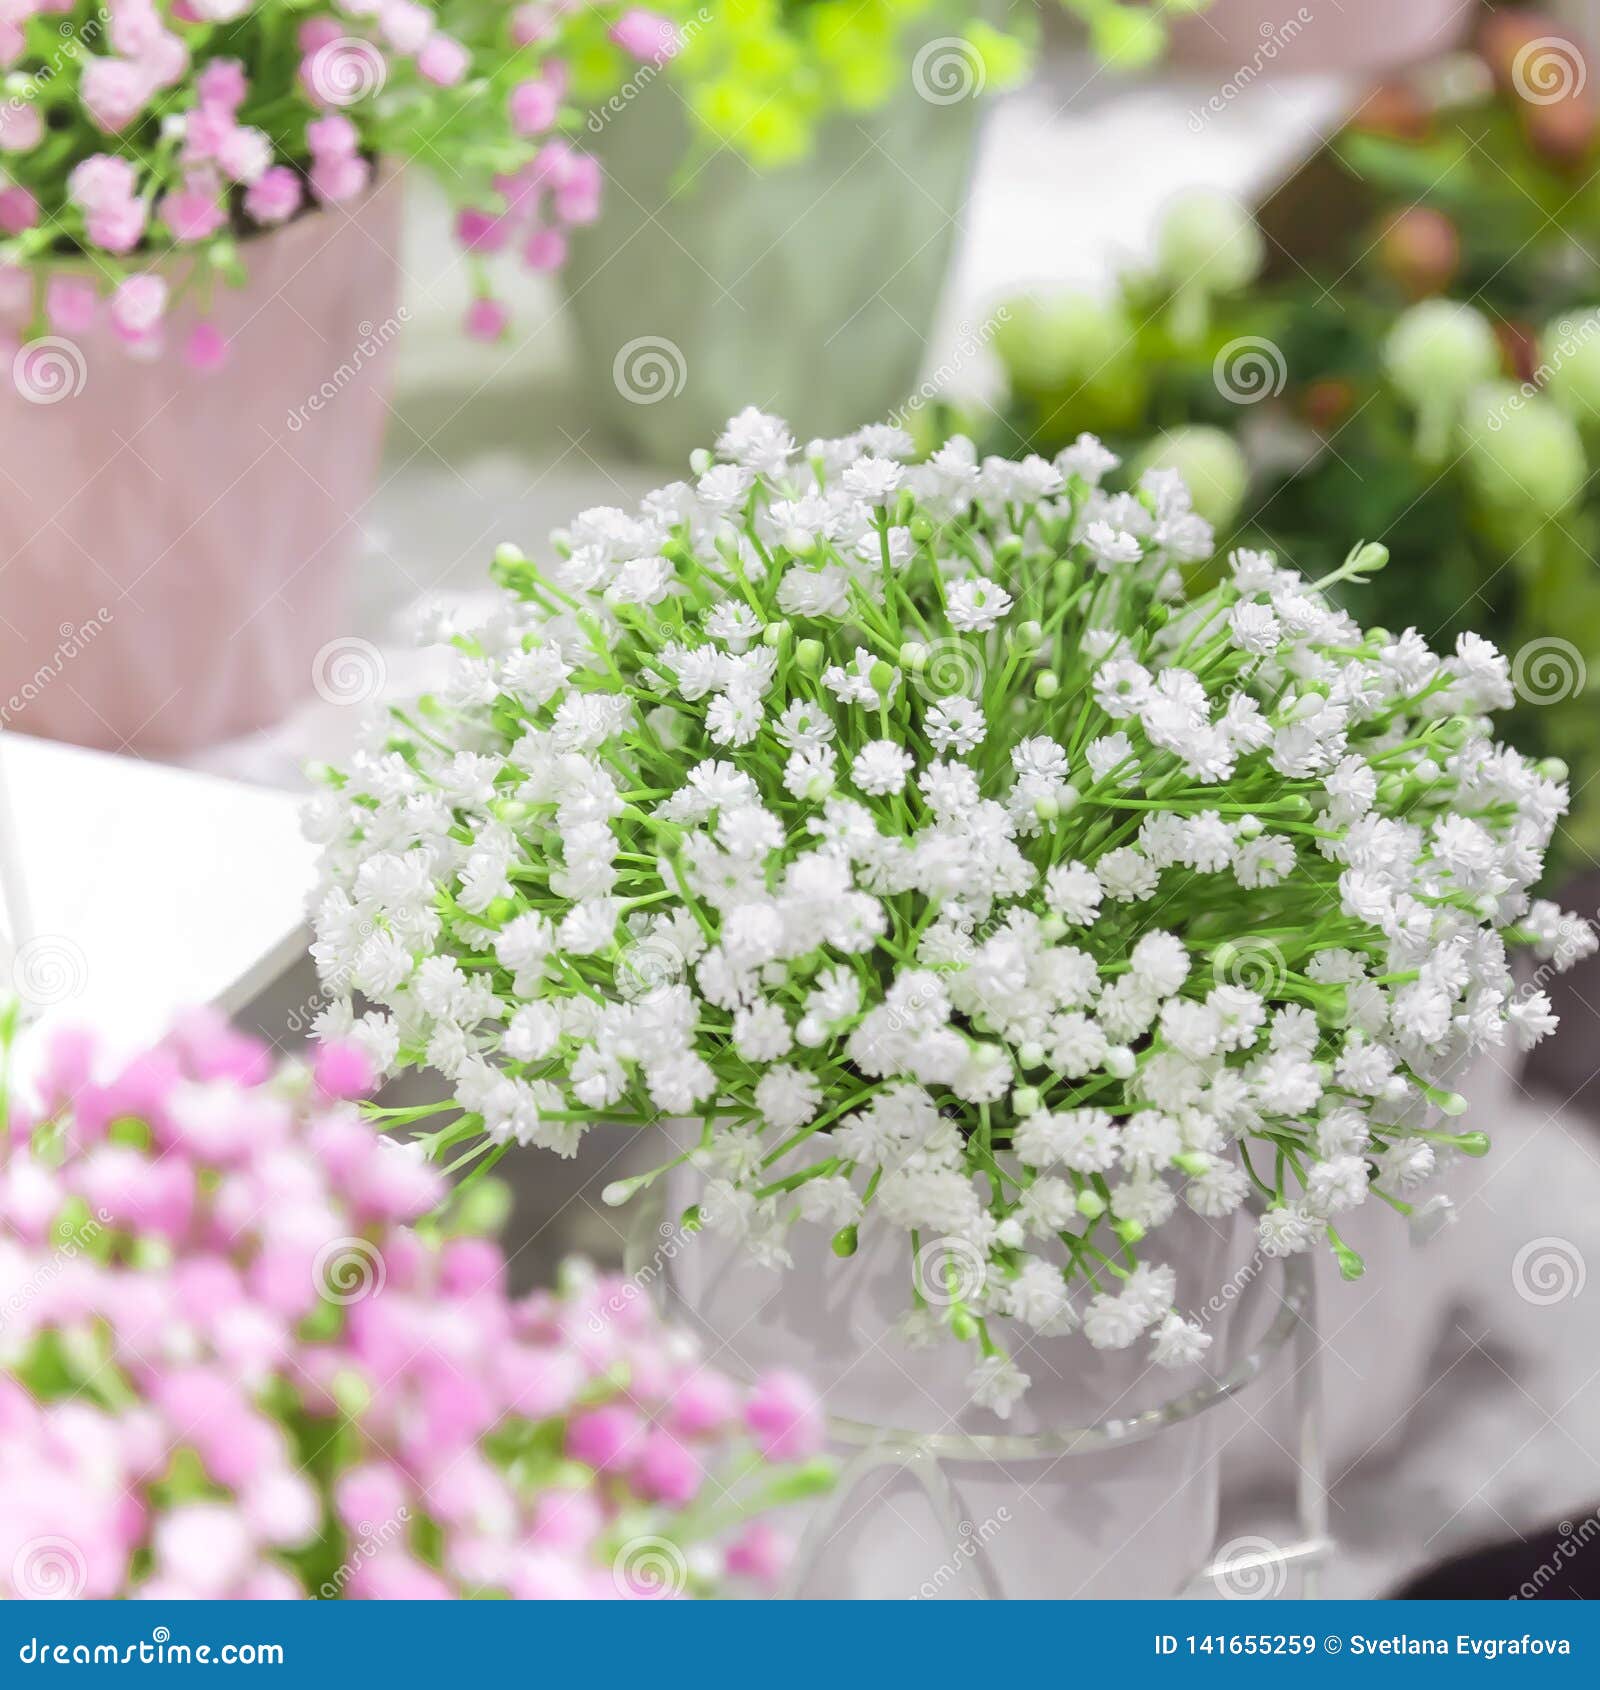 Elements and Details of Garden and Home Decor and Interior. Artificial  Plants Small Flowers of White and Pink Color Stock Image - Image of flora,  floral: 141655259